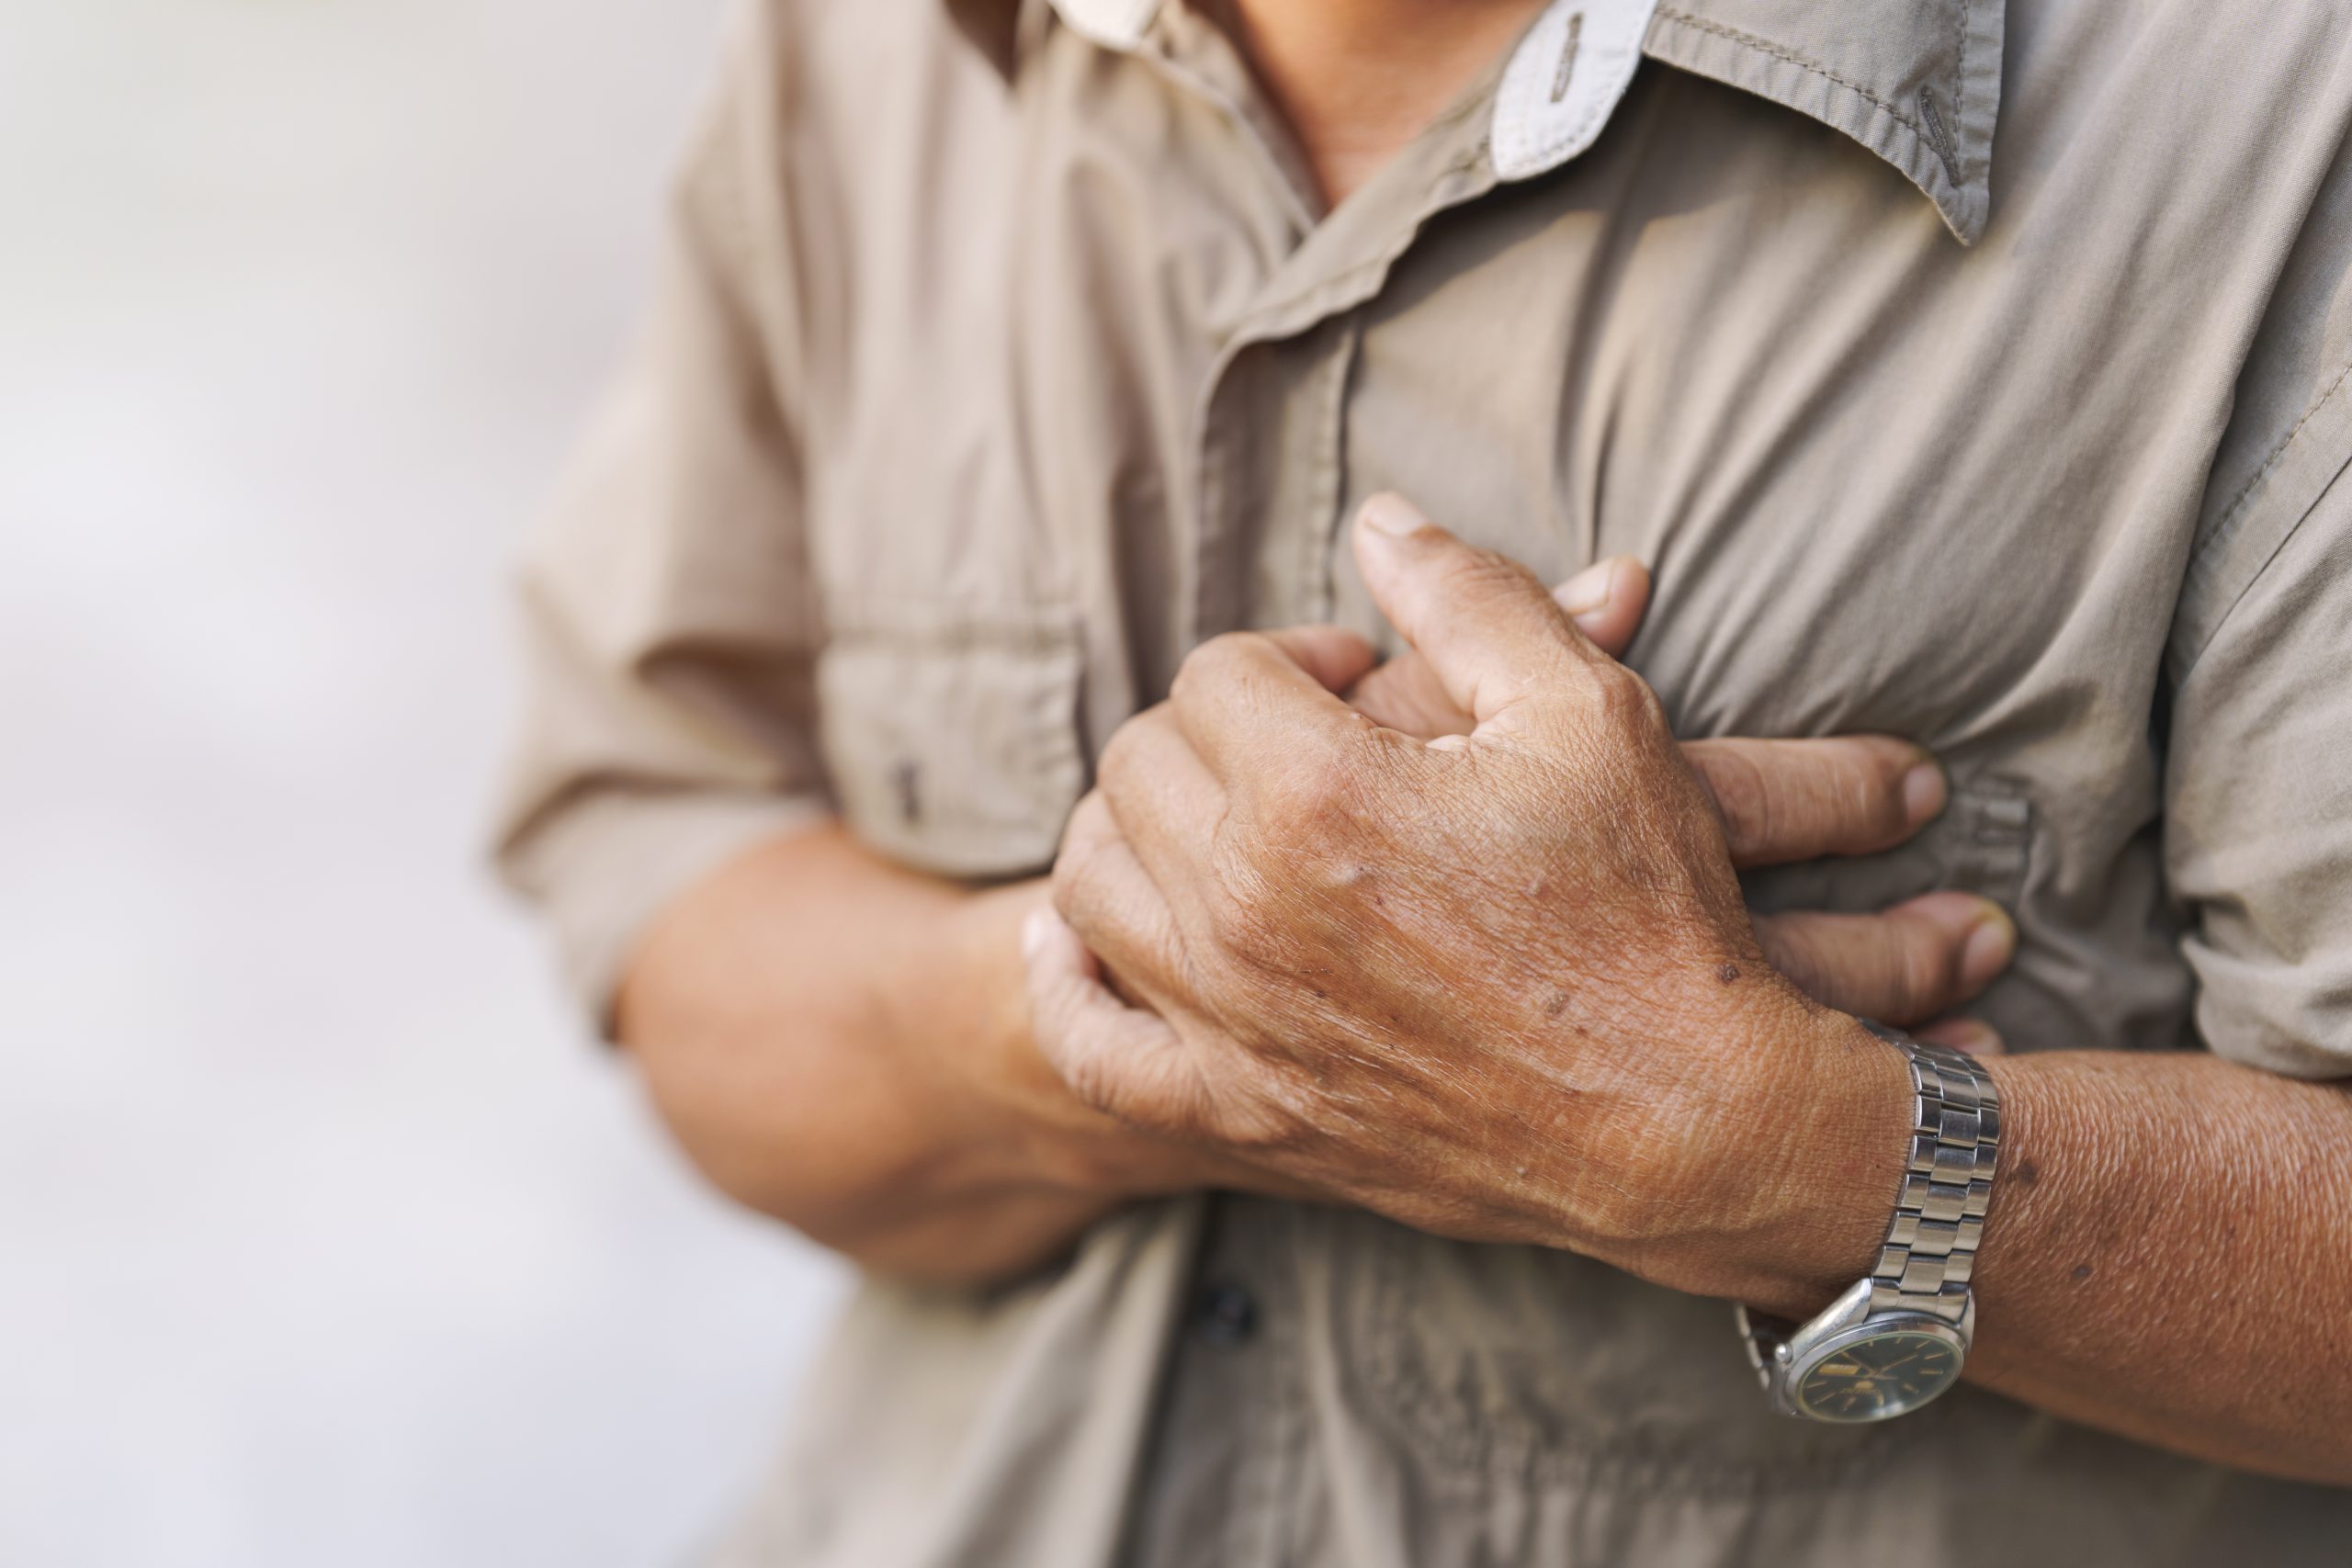 An Elderly Heart: Common Heart Conditions & How to Maintain A Healthy Heart